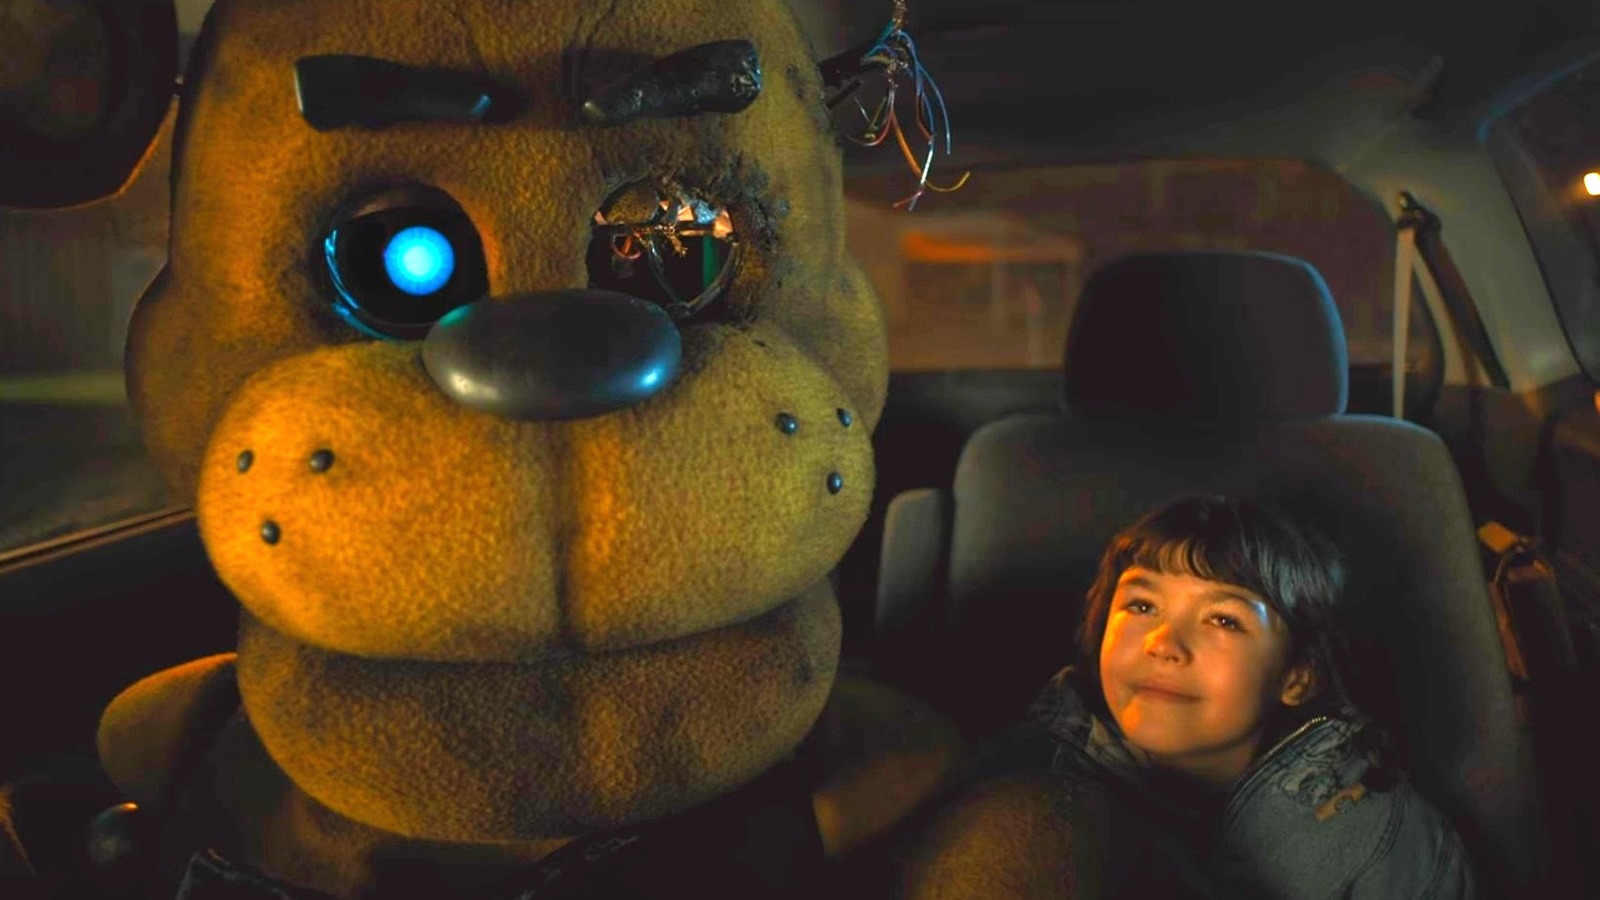 Five Nights At Freddys Blumhouse Horror Film Lands An Unexpected Rating 7257